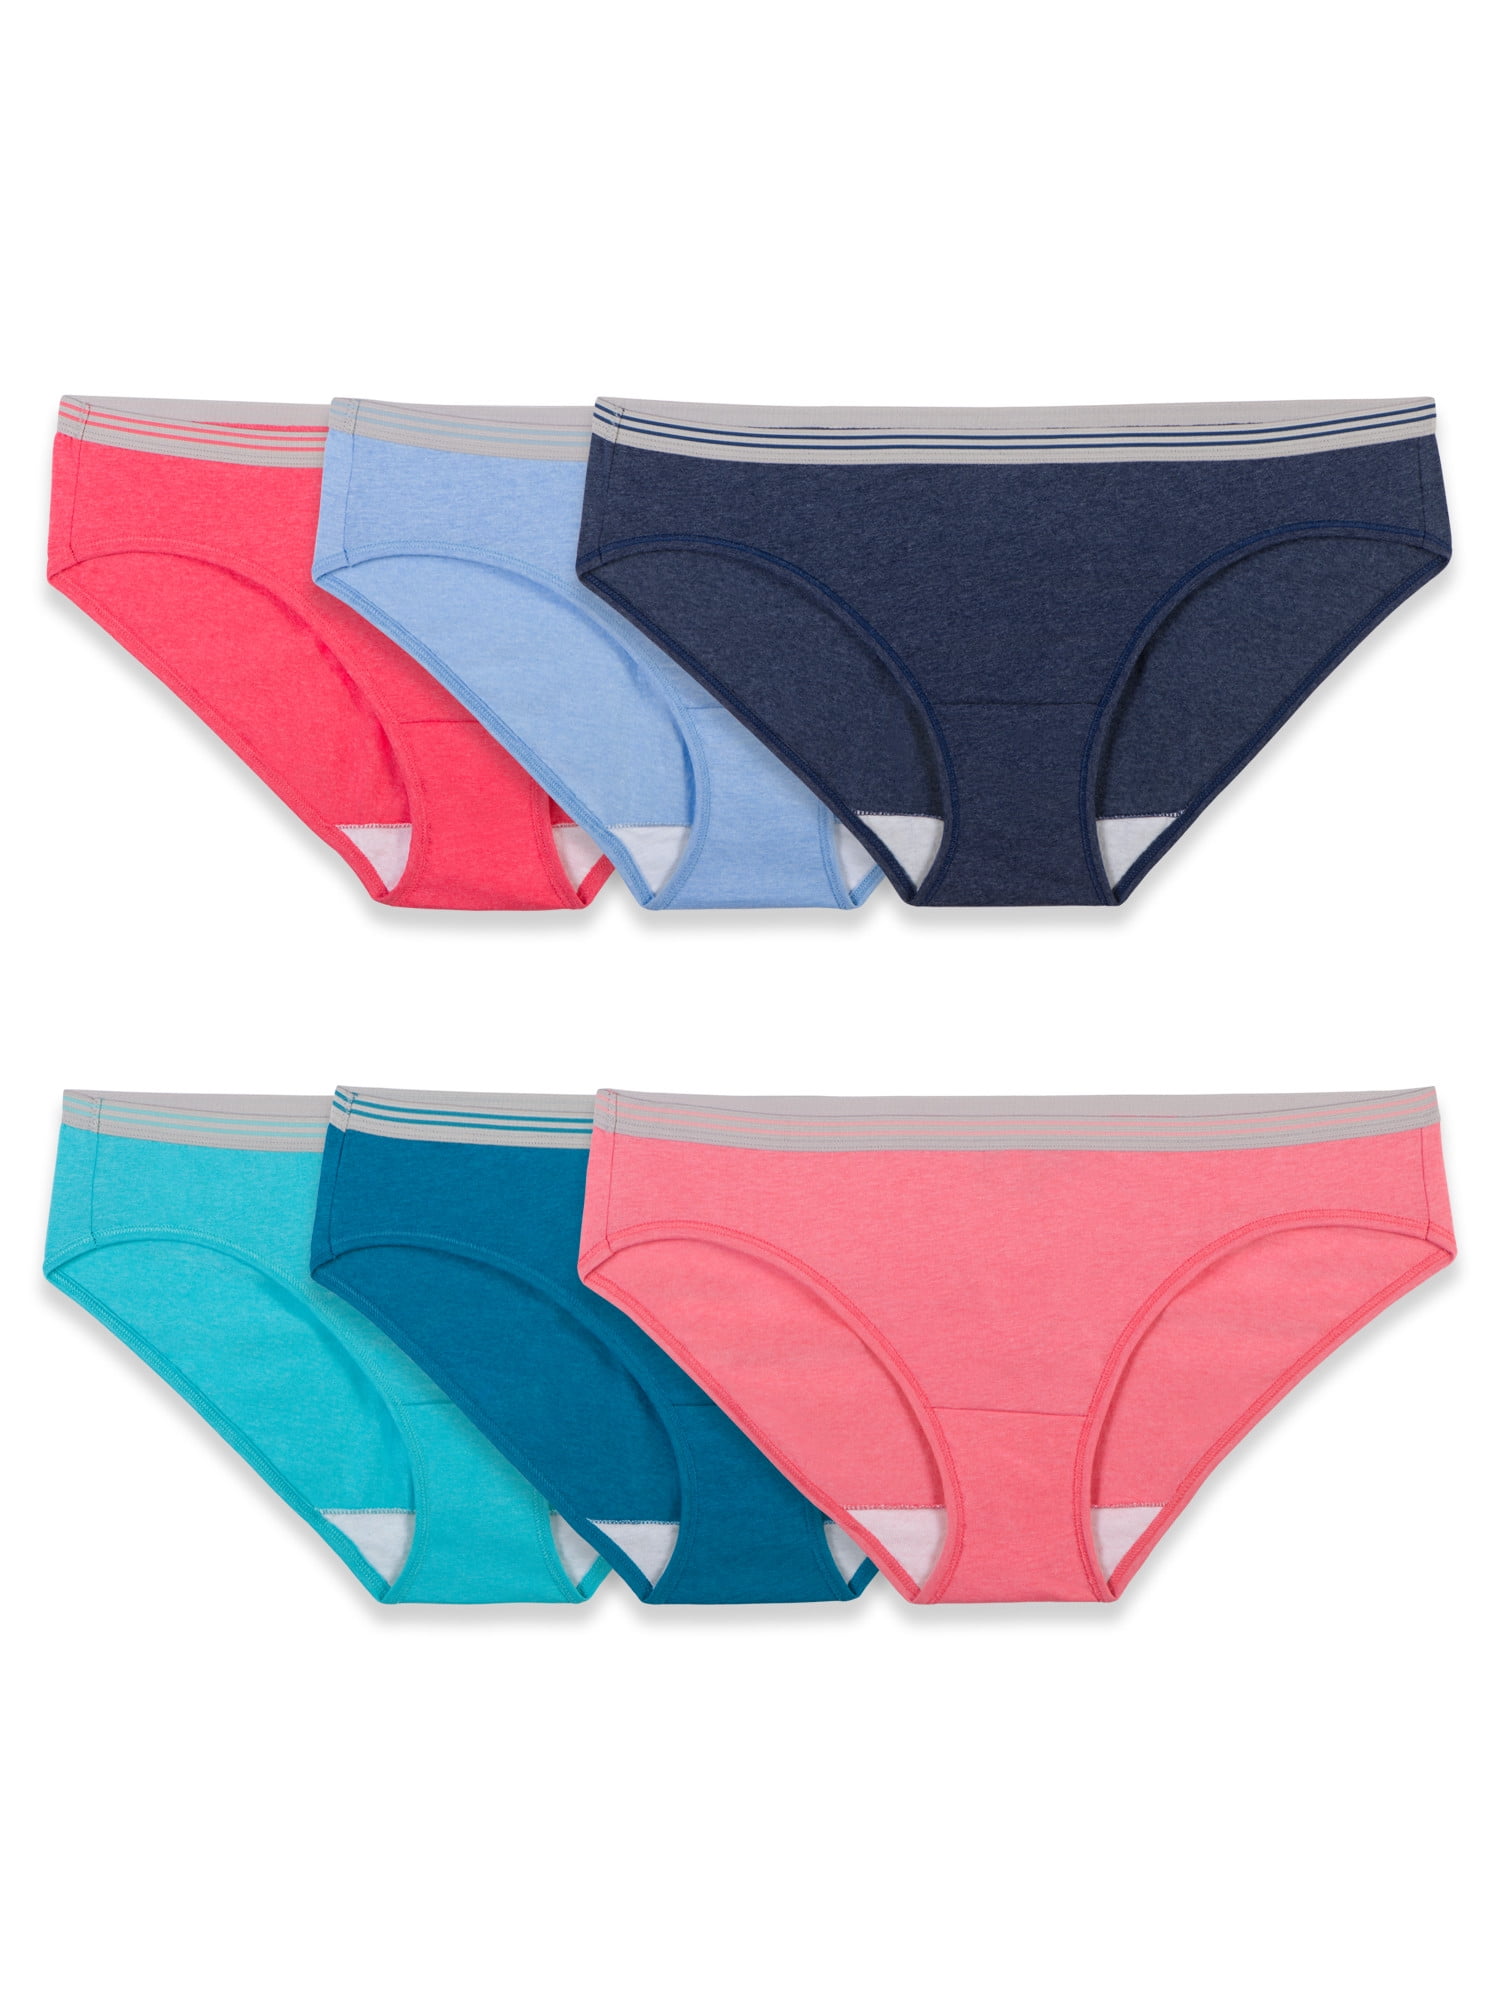 Fruit of the Loom Womens 6 Pack Assorted Cotton Low-Rise Bikini Panties ...